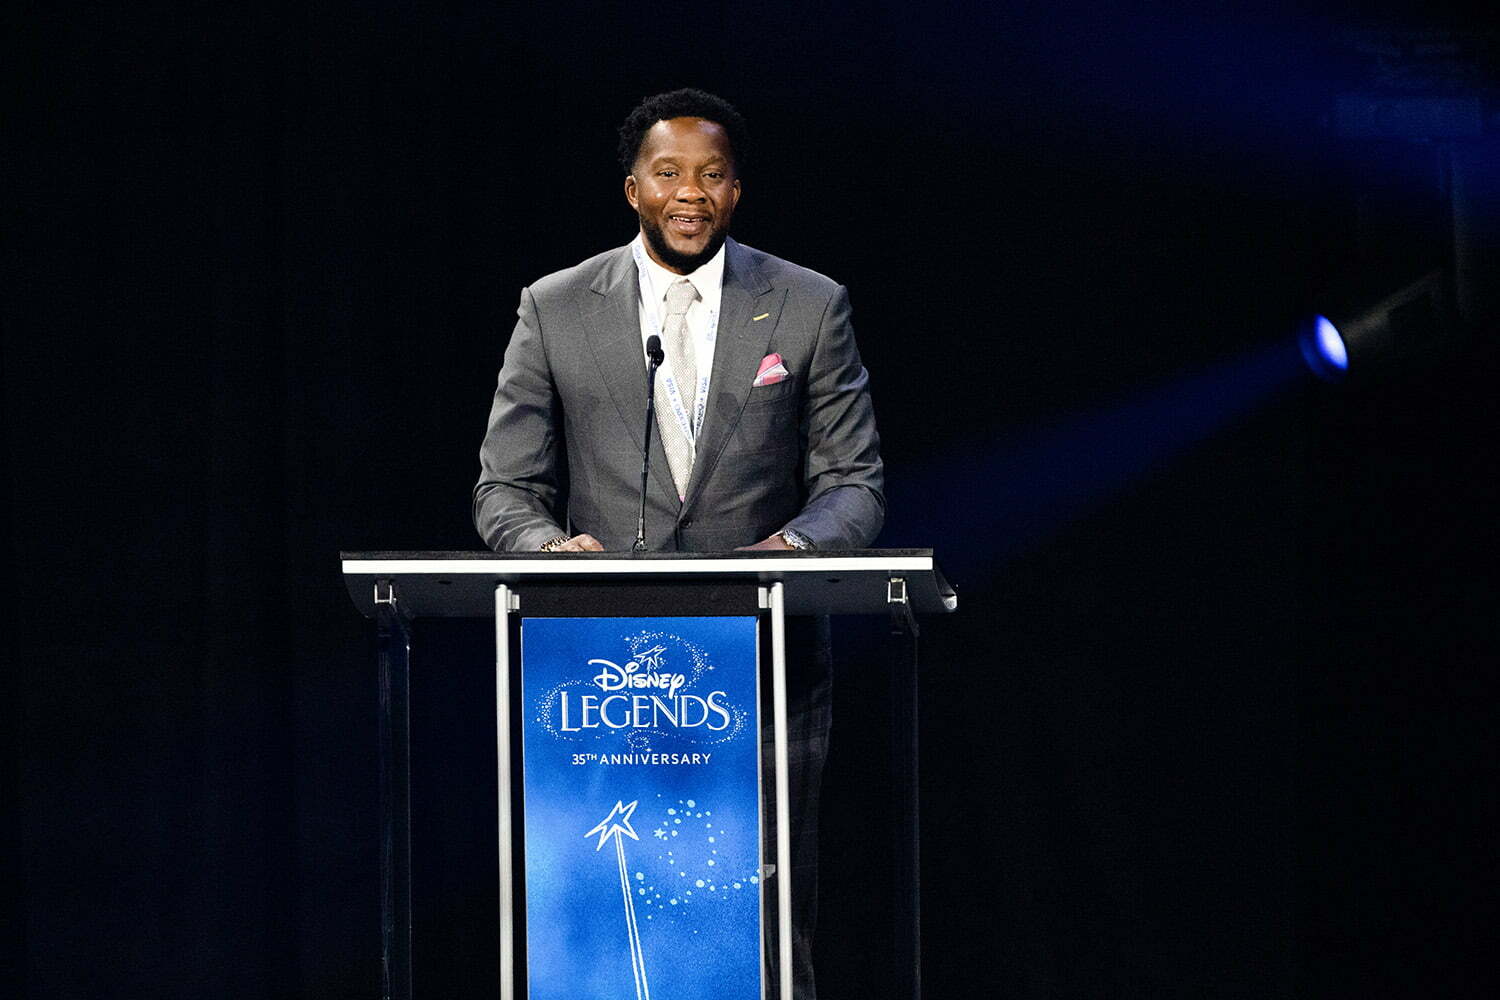 Derrick Boseman (Brother of Chadwick Boseman) accepted the award for his brother at the Opening Ceremony of D23 Expo